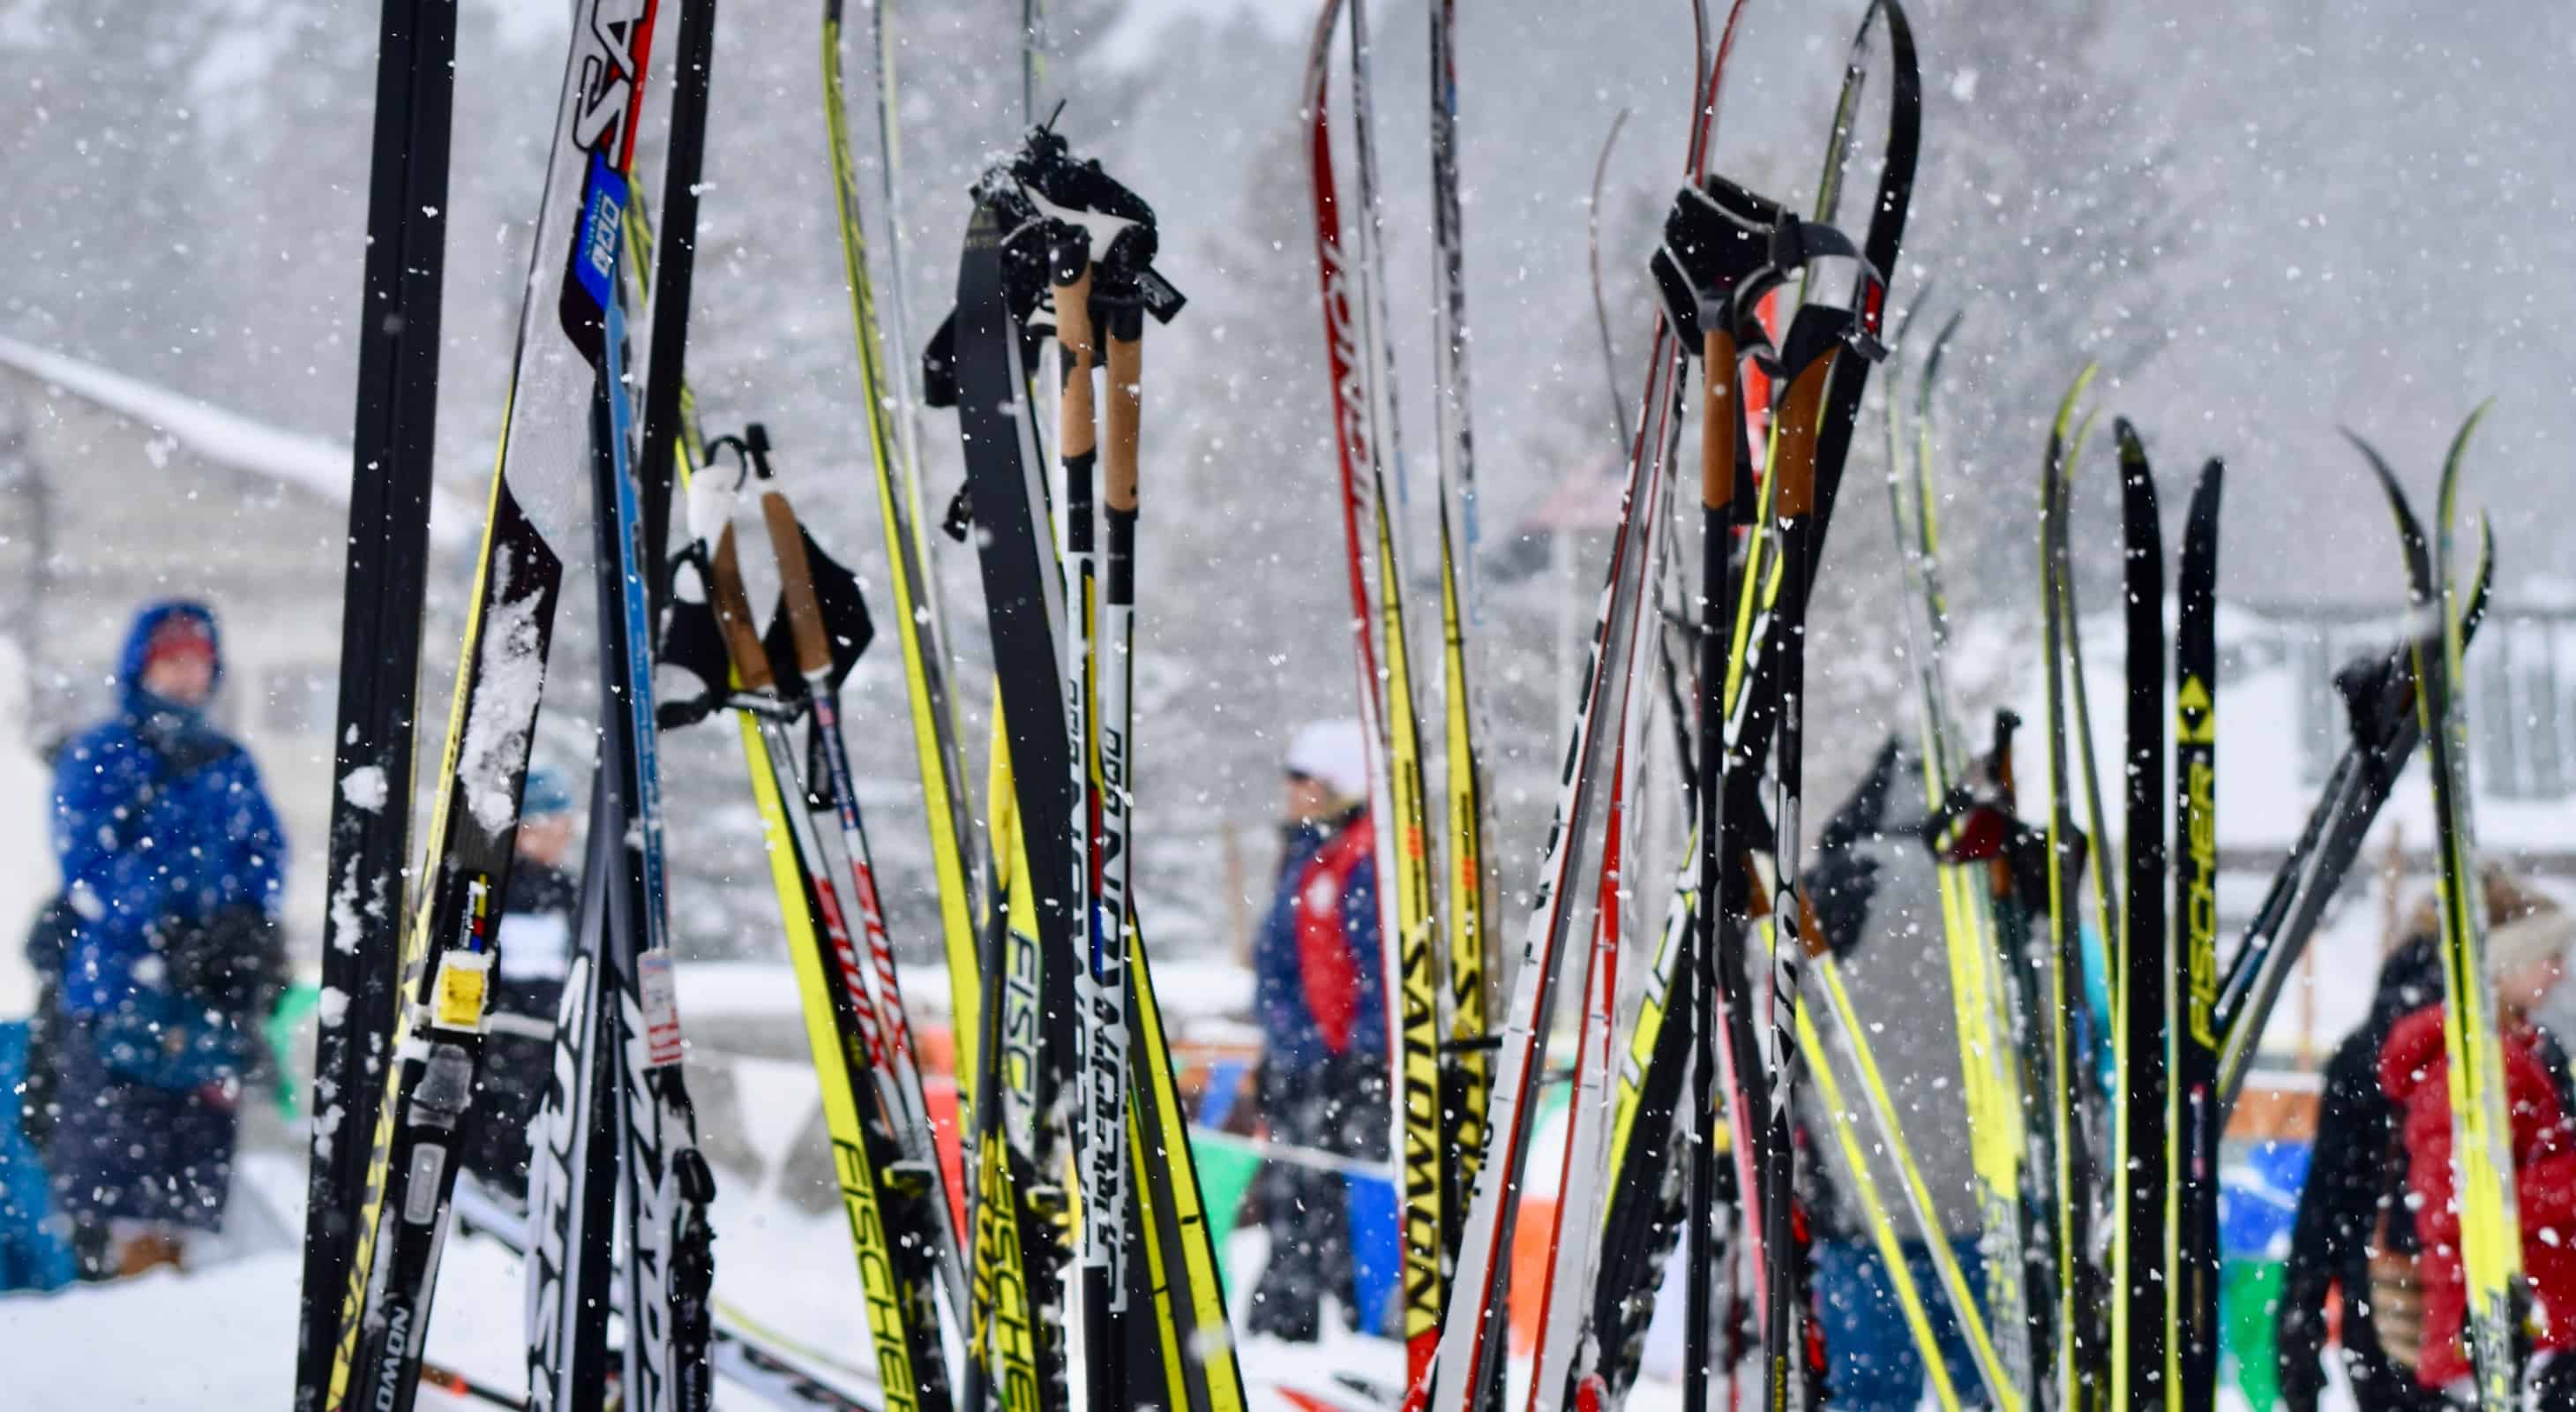 skis and ski poles stuck in the snow